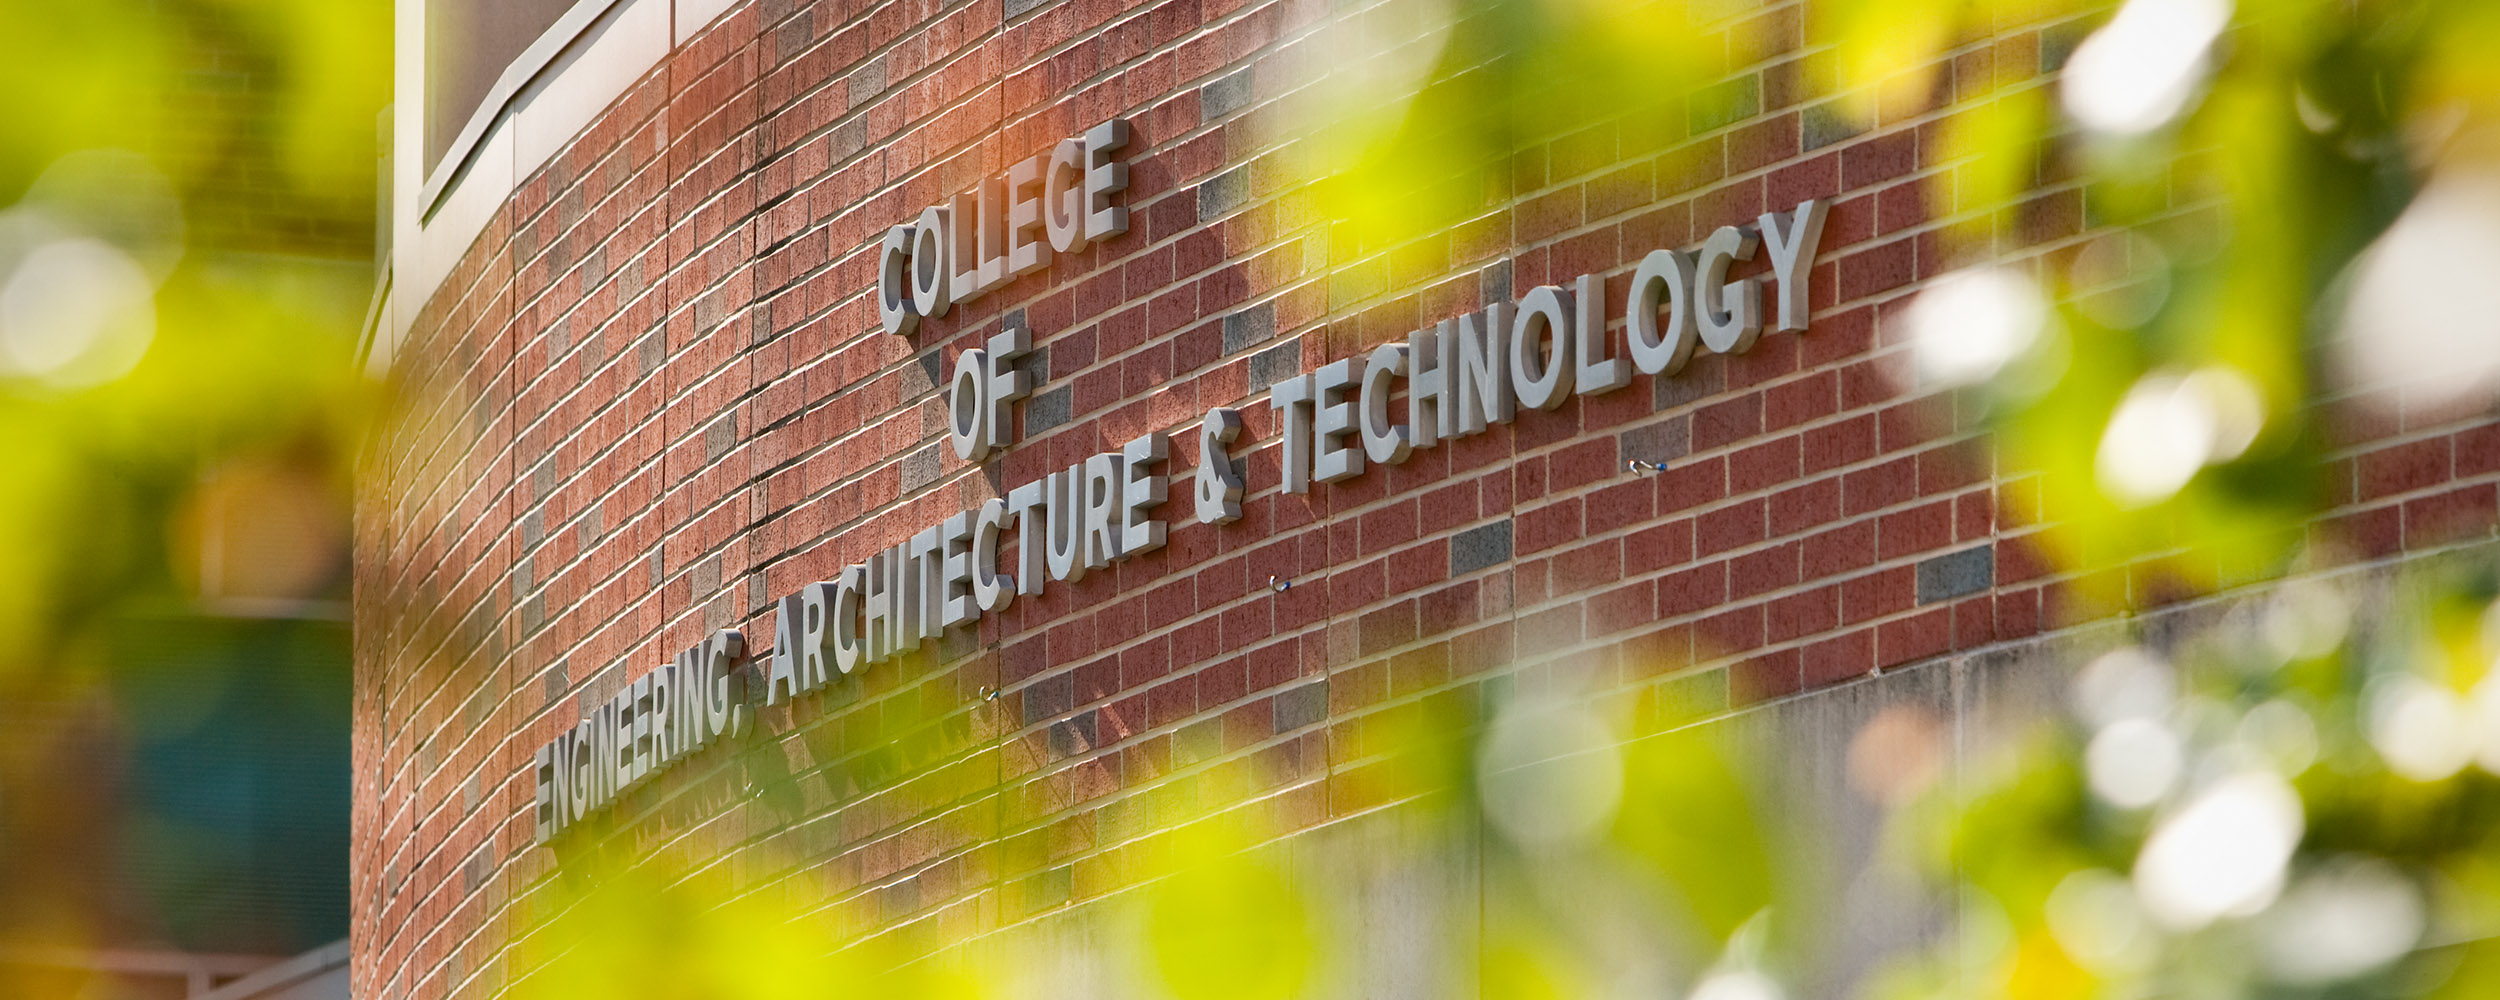 Sign at the College of Engineering, Architecture and Technology